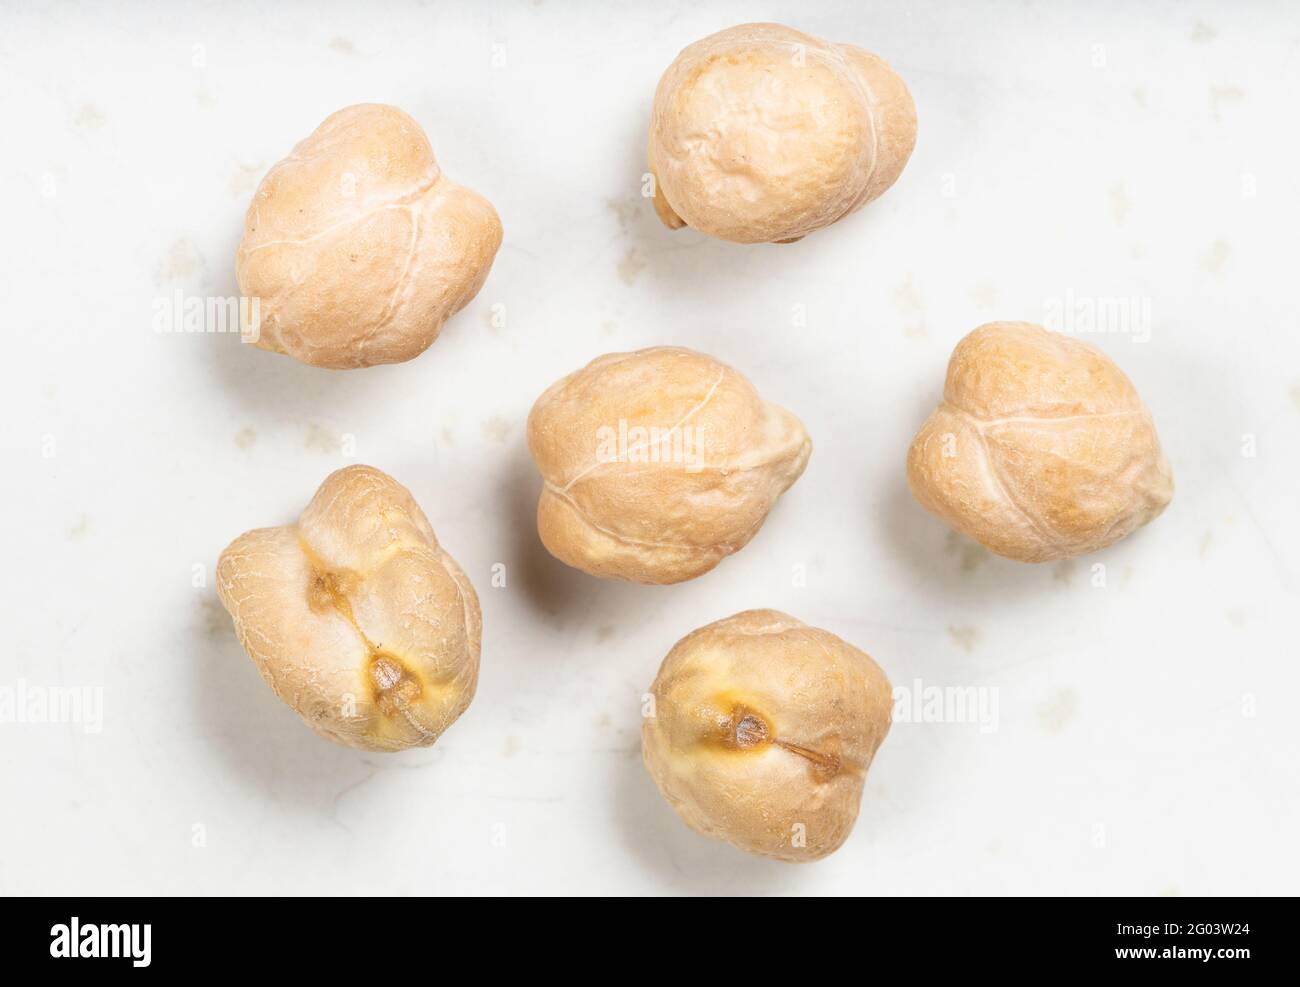 several raw dried chickpea seeds close up on gray ceramic plate Stock Photo